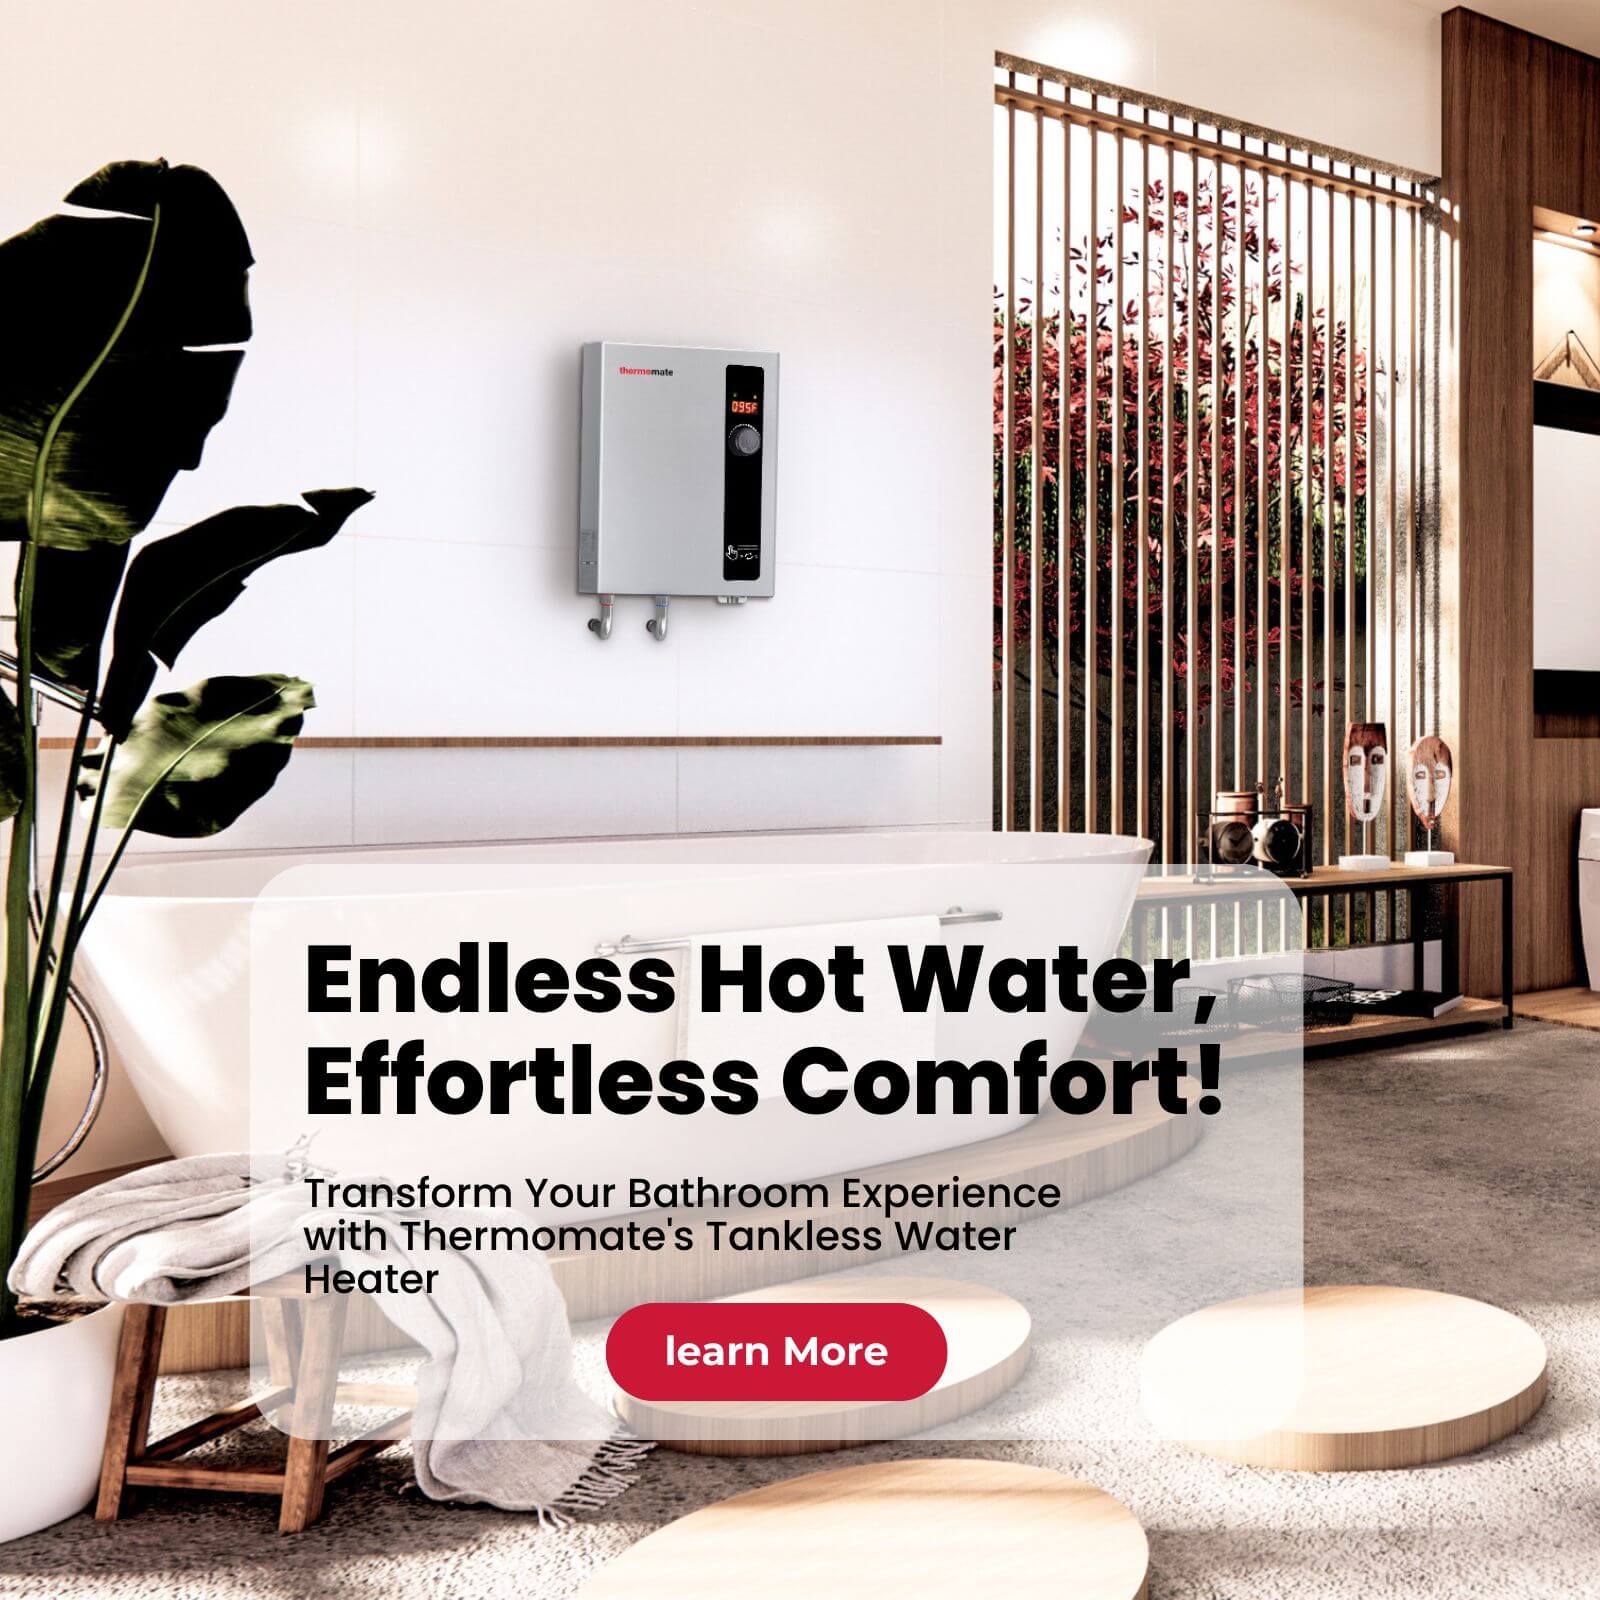 Endless_Hot_Water_Effortless_Comfort | Thermomate